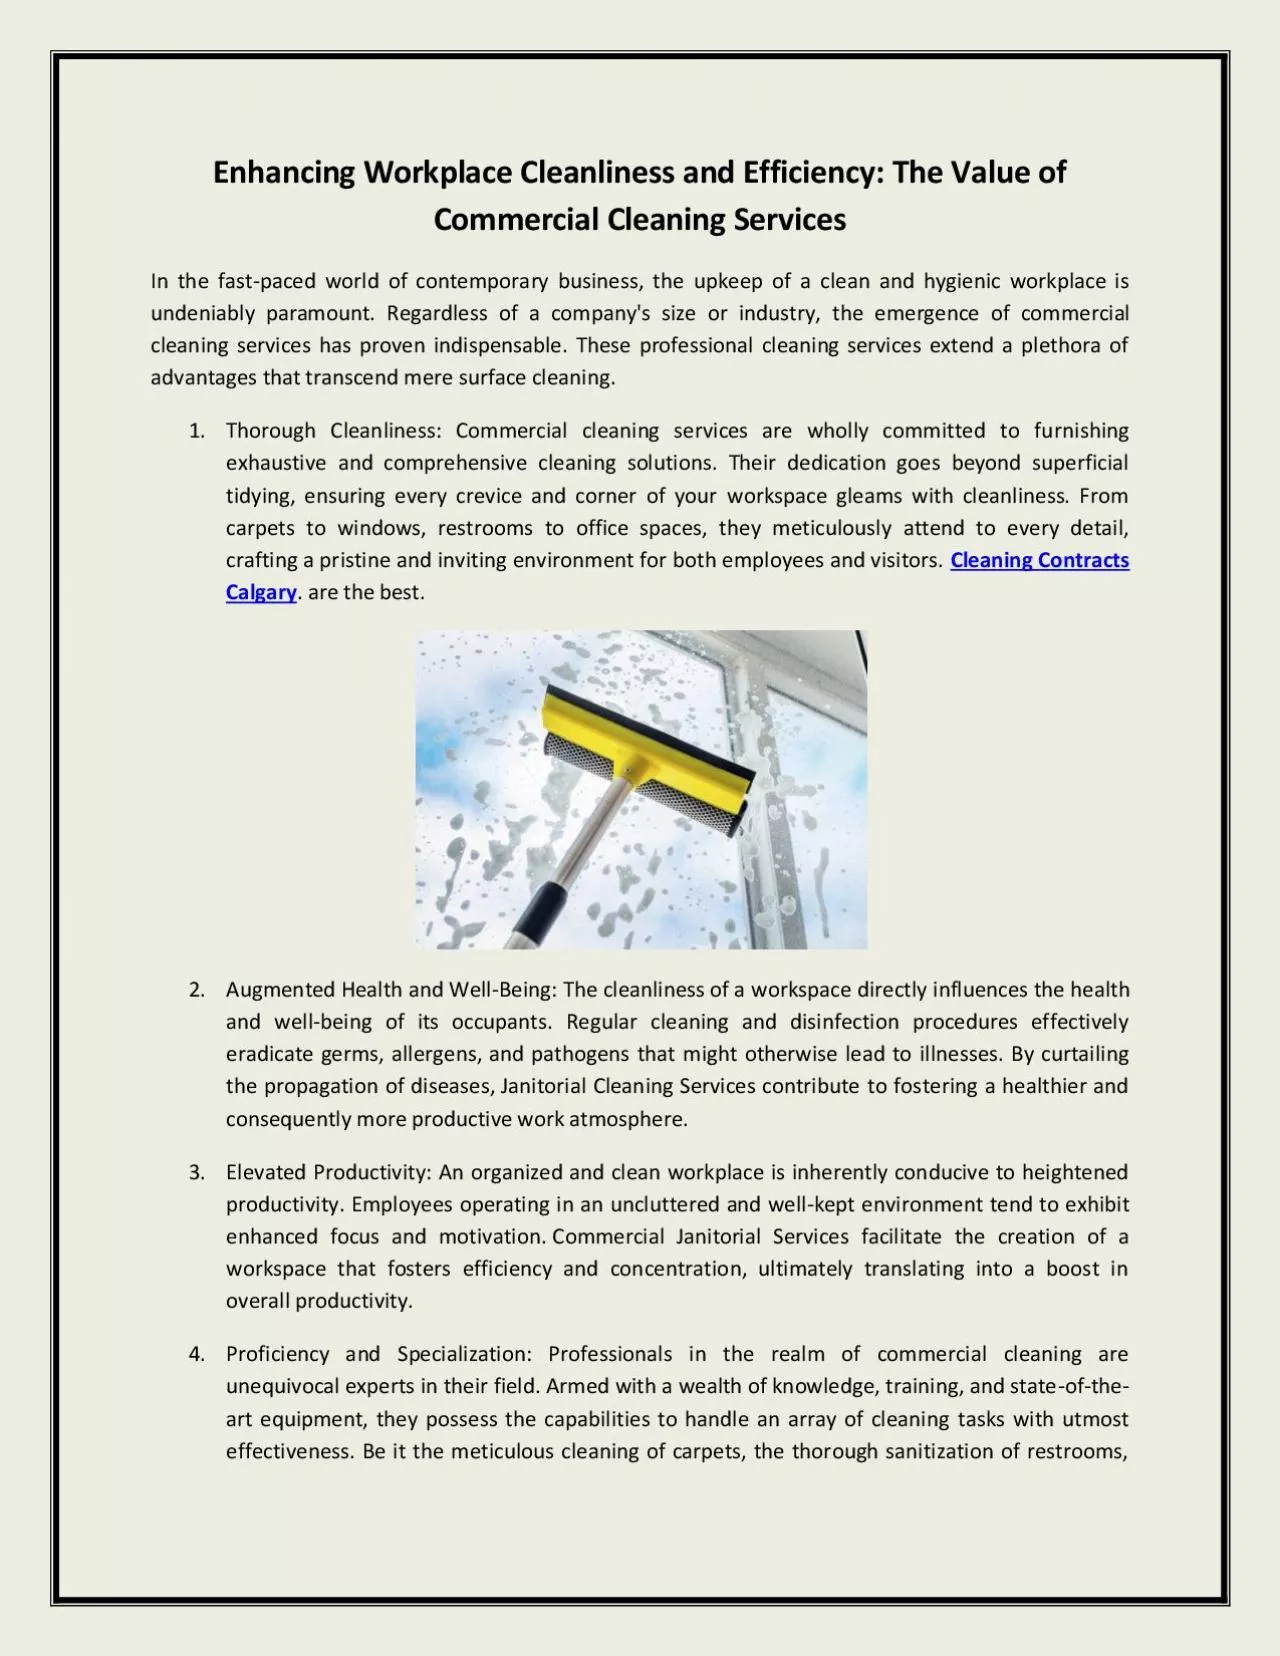 Enhancing Workplace Cleanliness and Efficiency: The Value of Commercial Cleaning Services